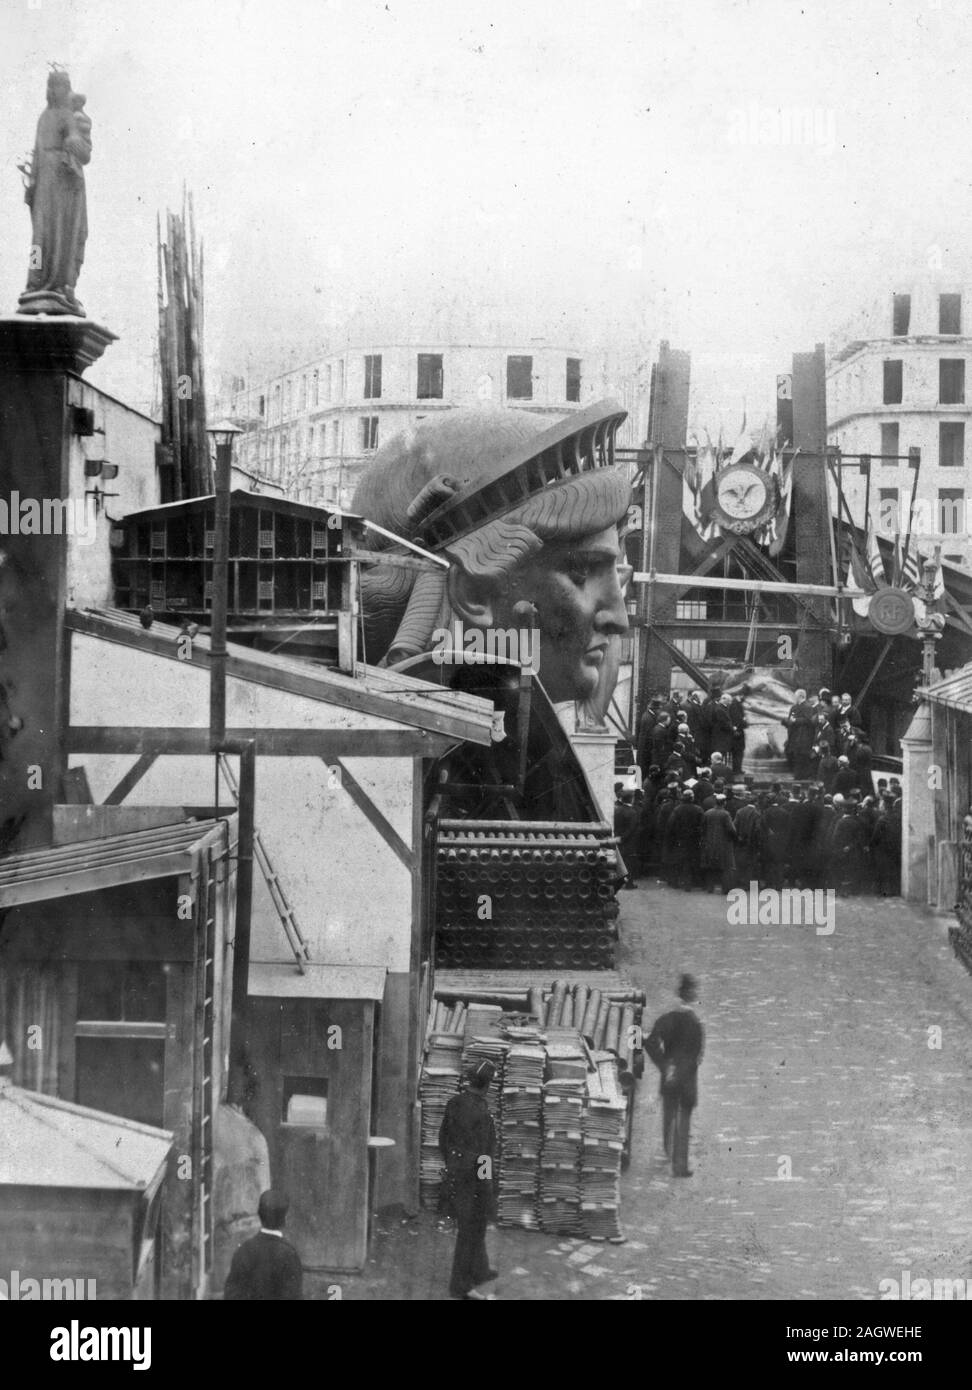 External area of the workshop in Paris, showing construction materials, the head of the Statue of Liberty, and a group of men Stock Photo